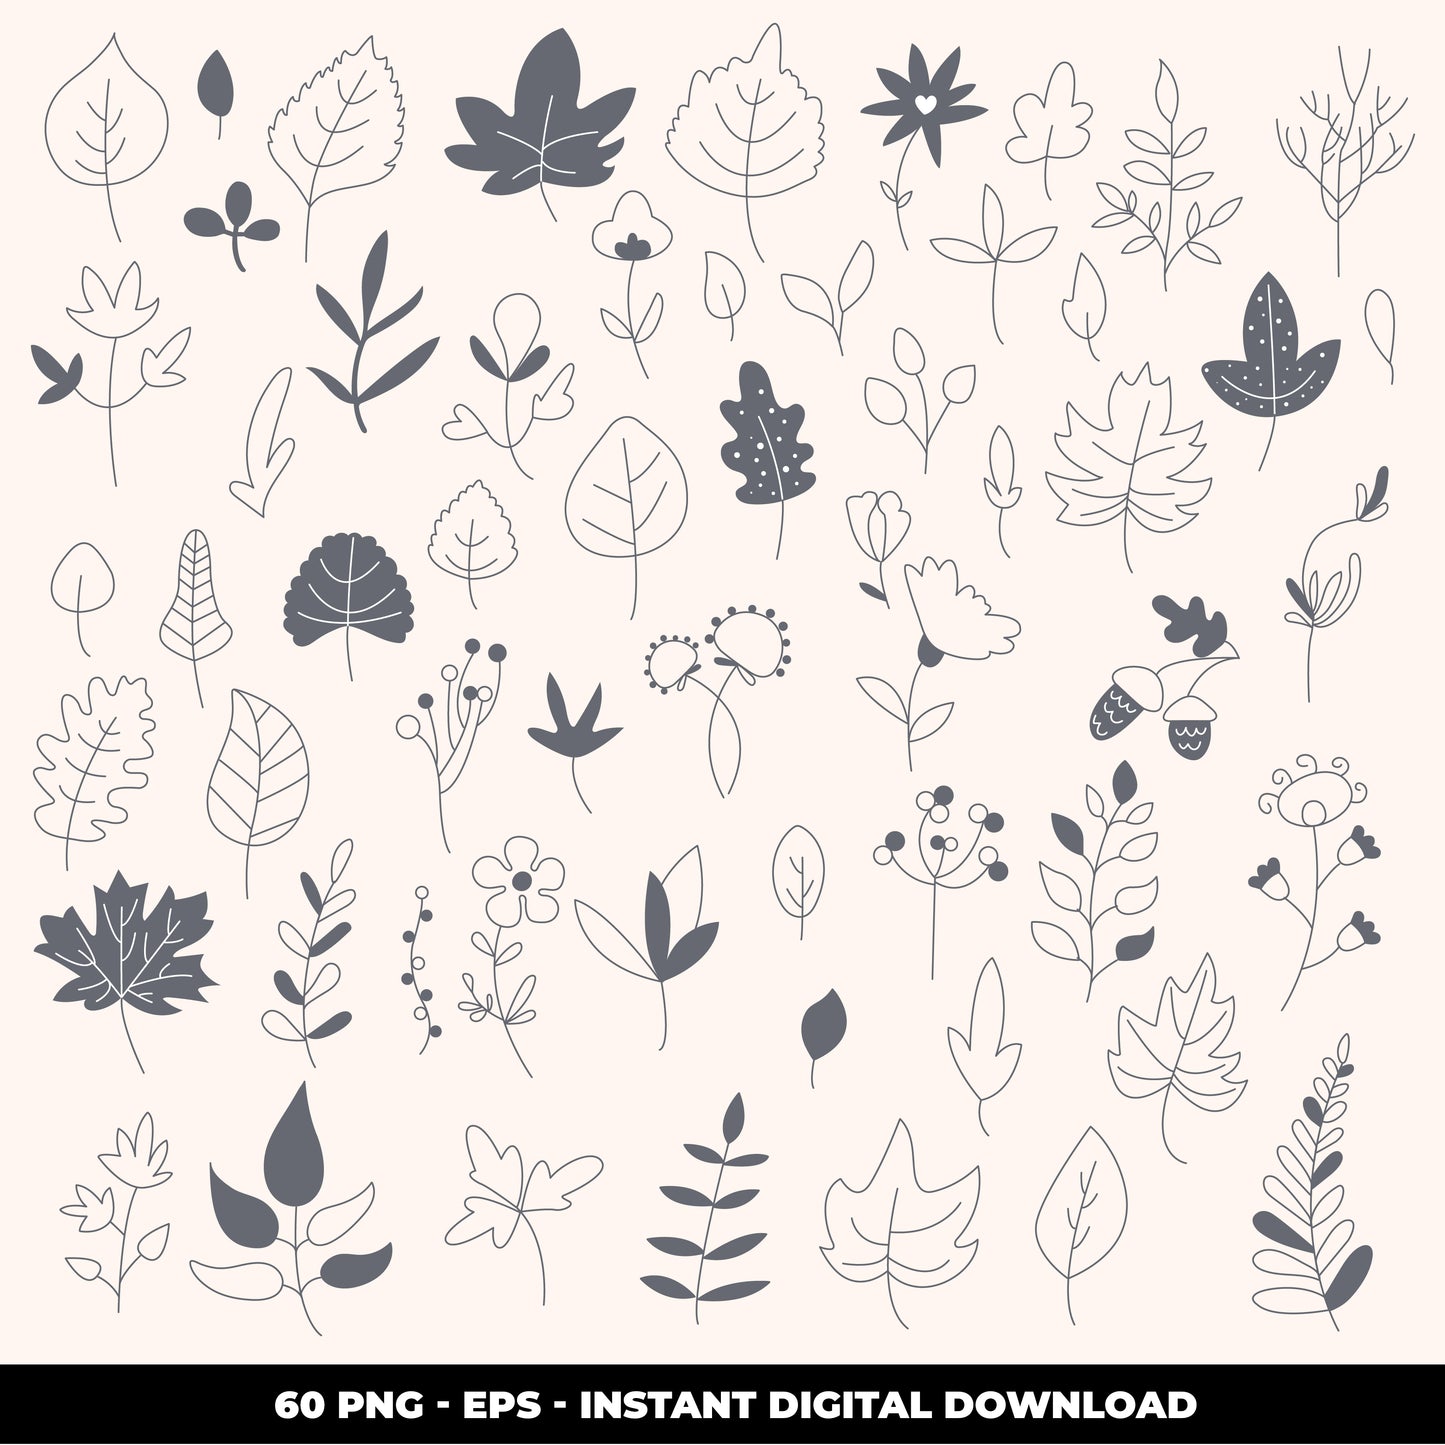 COD824 - Leaves clipart, Hand Drawn Leaves, Plant png, Paper Leaves, Leaf Templates, Wreath, Cut Files, Leaf Clipart, Cricut Silhouette